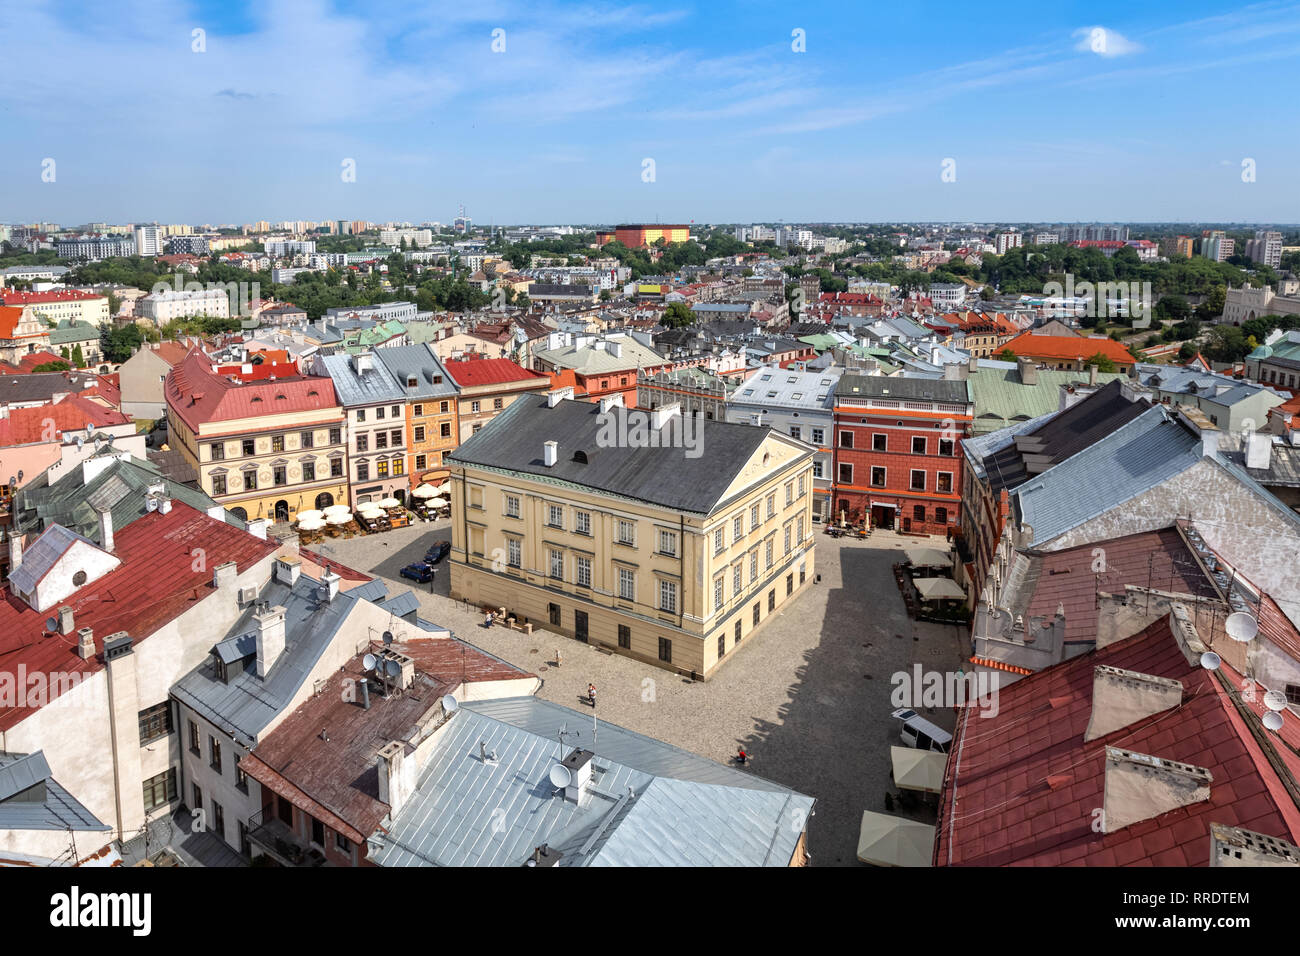 Lublin, Poland. Aerial view of The Old Town Market Square Stock Photo